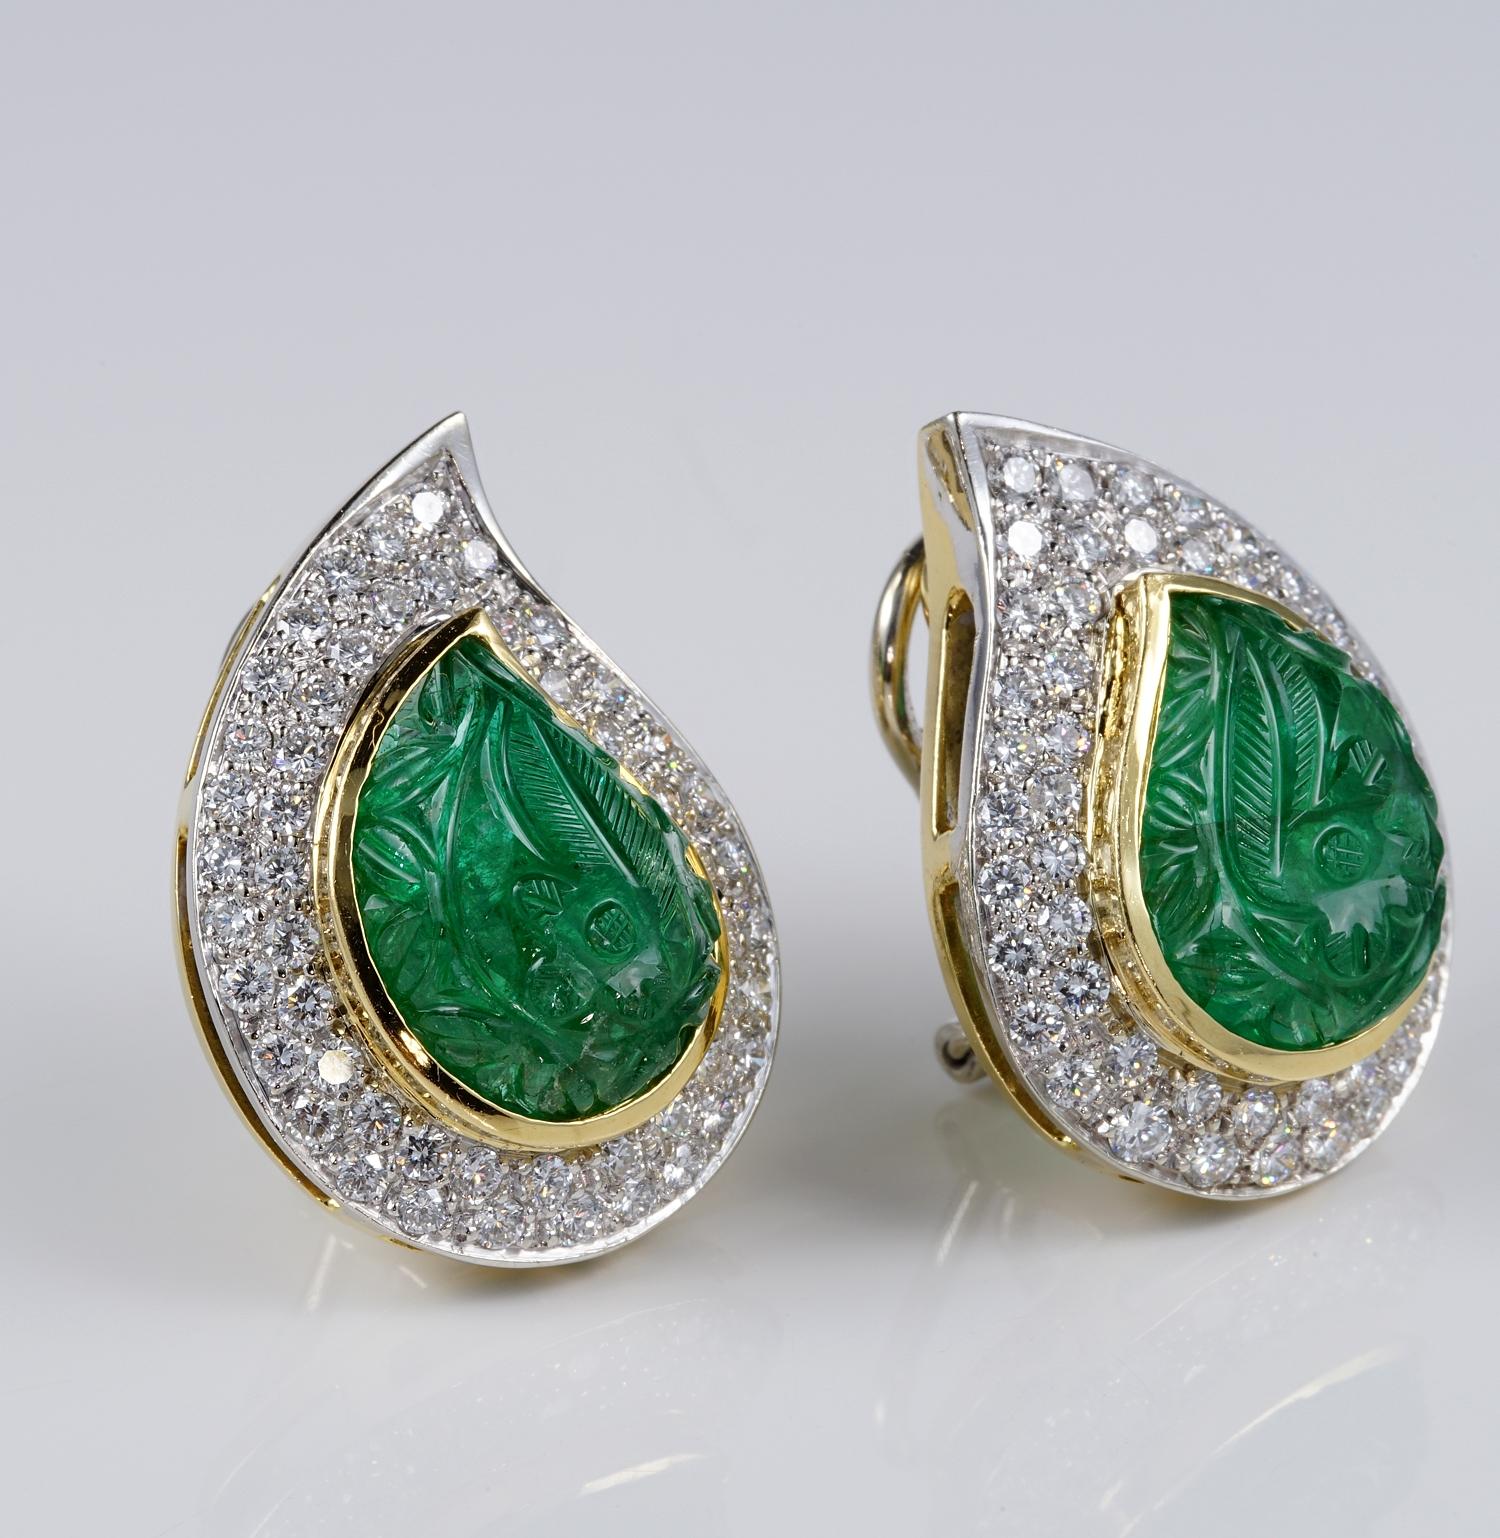 Contemporary Carved 22.00 Ct Mughal Carved Emerald 3.00 Ct Diamond Earrings